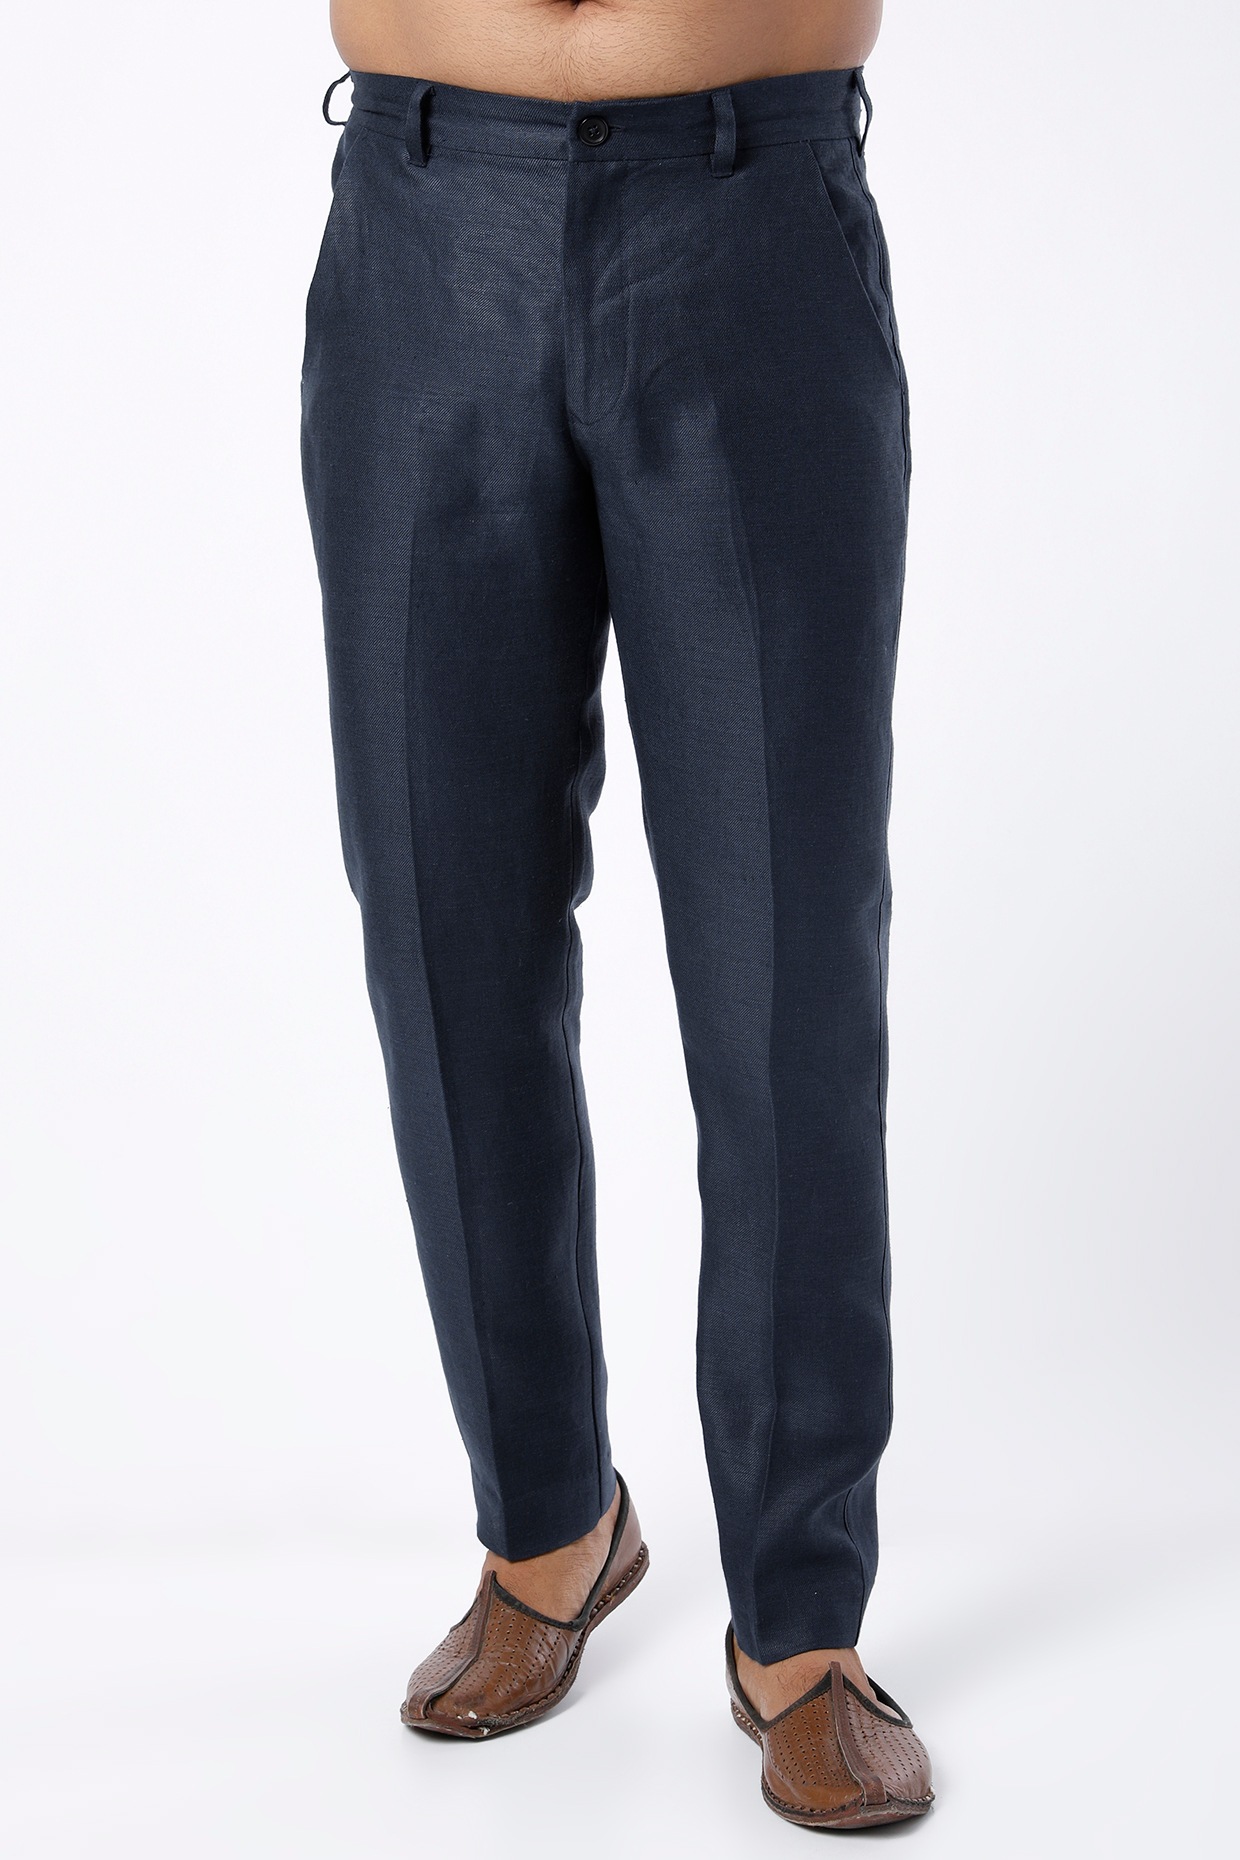 Ankle Fit Navy Blue 4 Way Stretchable Formal Pants – Stagbeetle